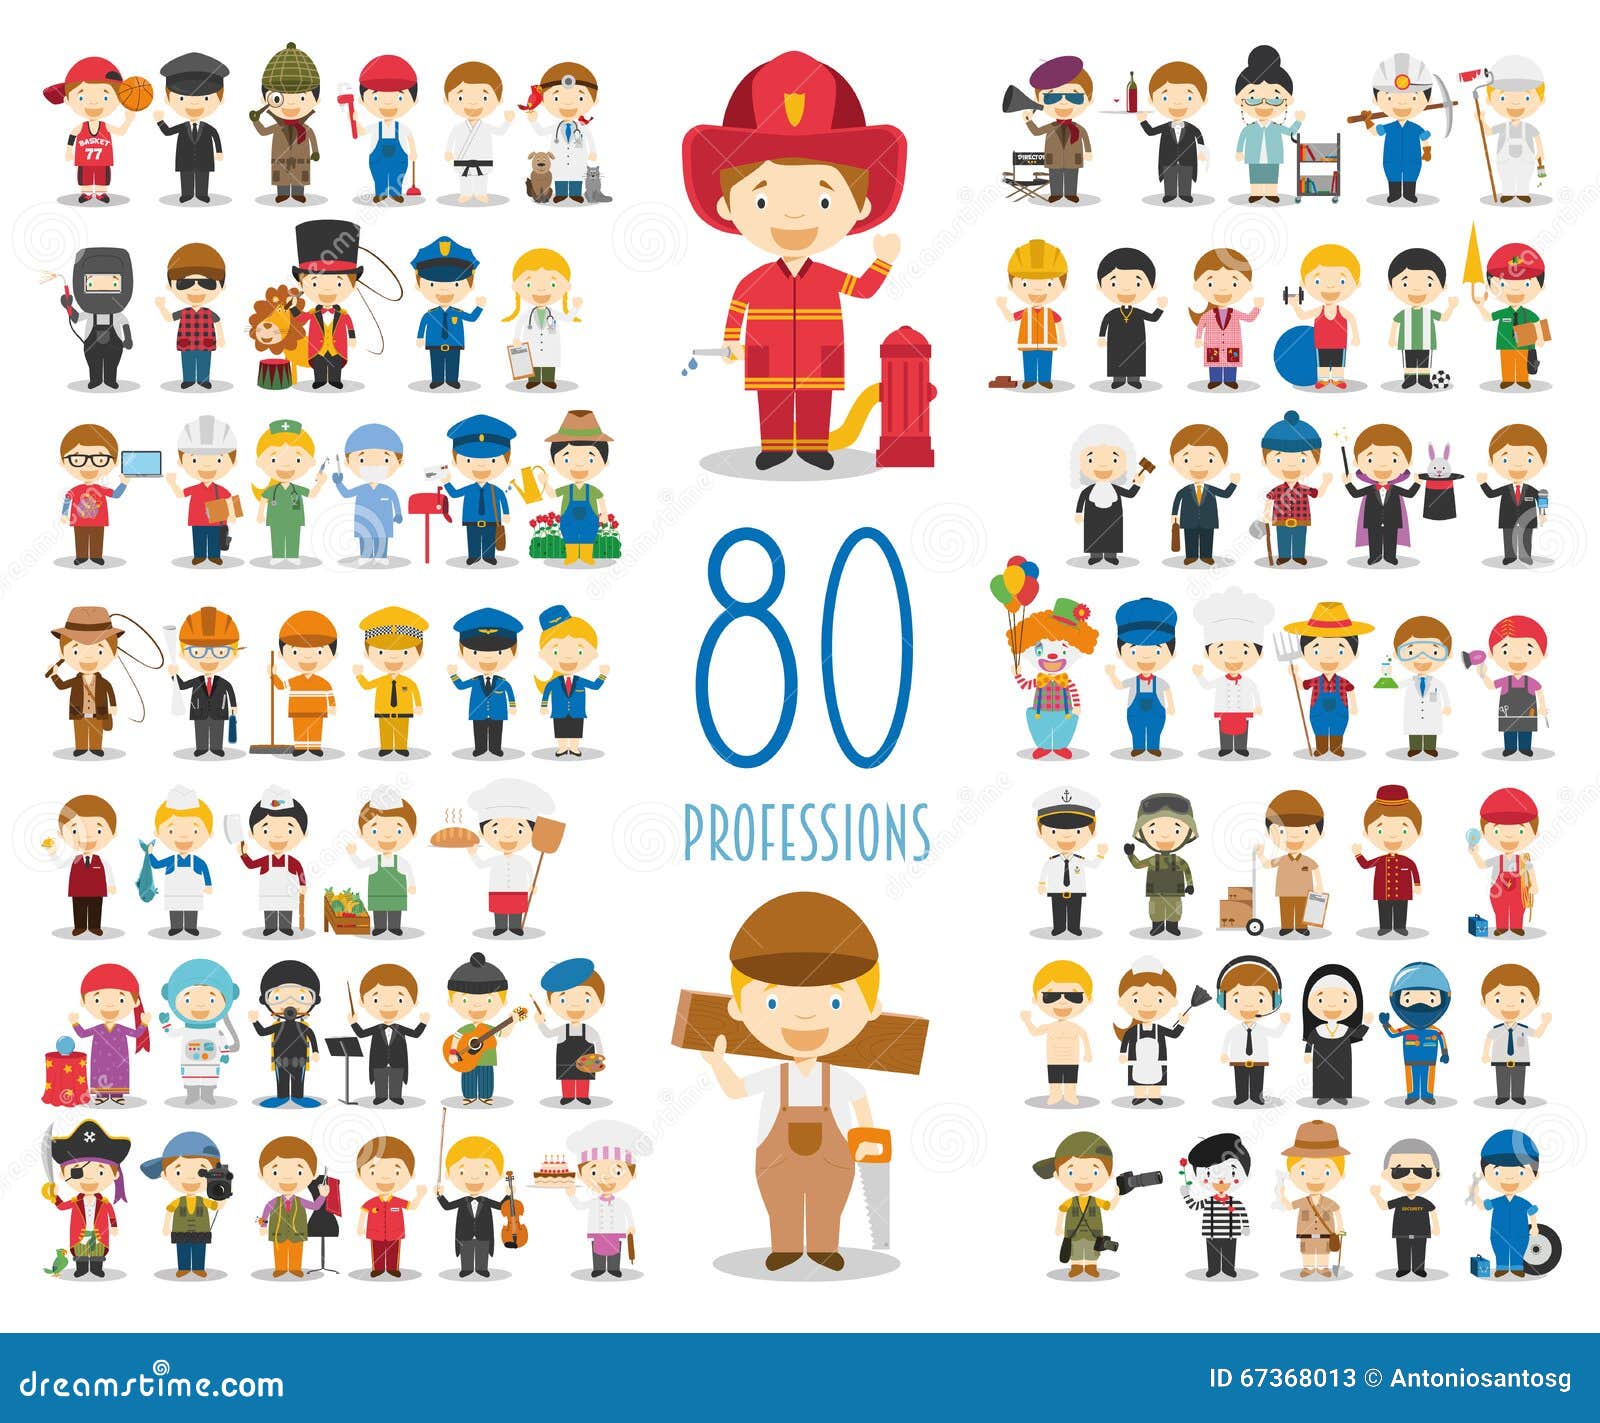 set of 80 different professions in cartoon style.